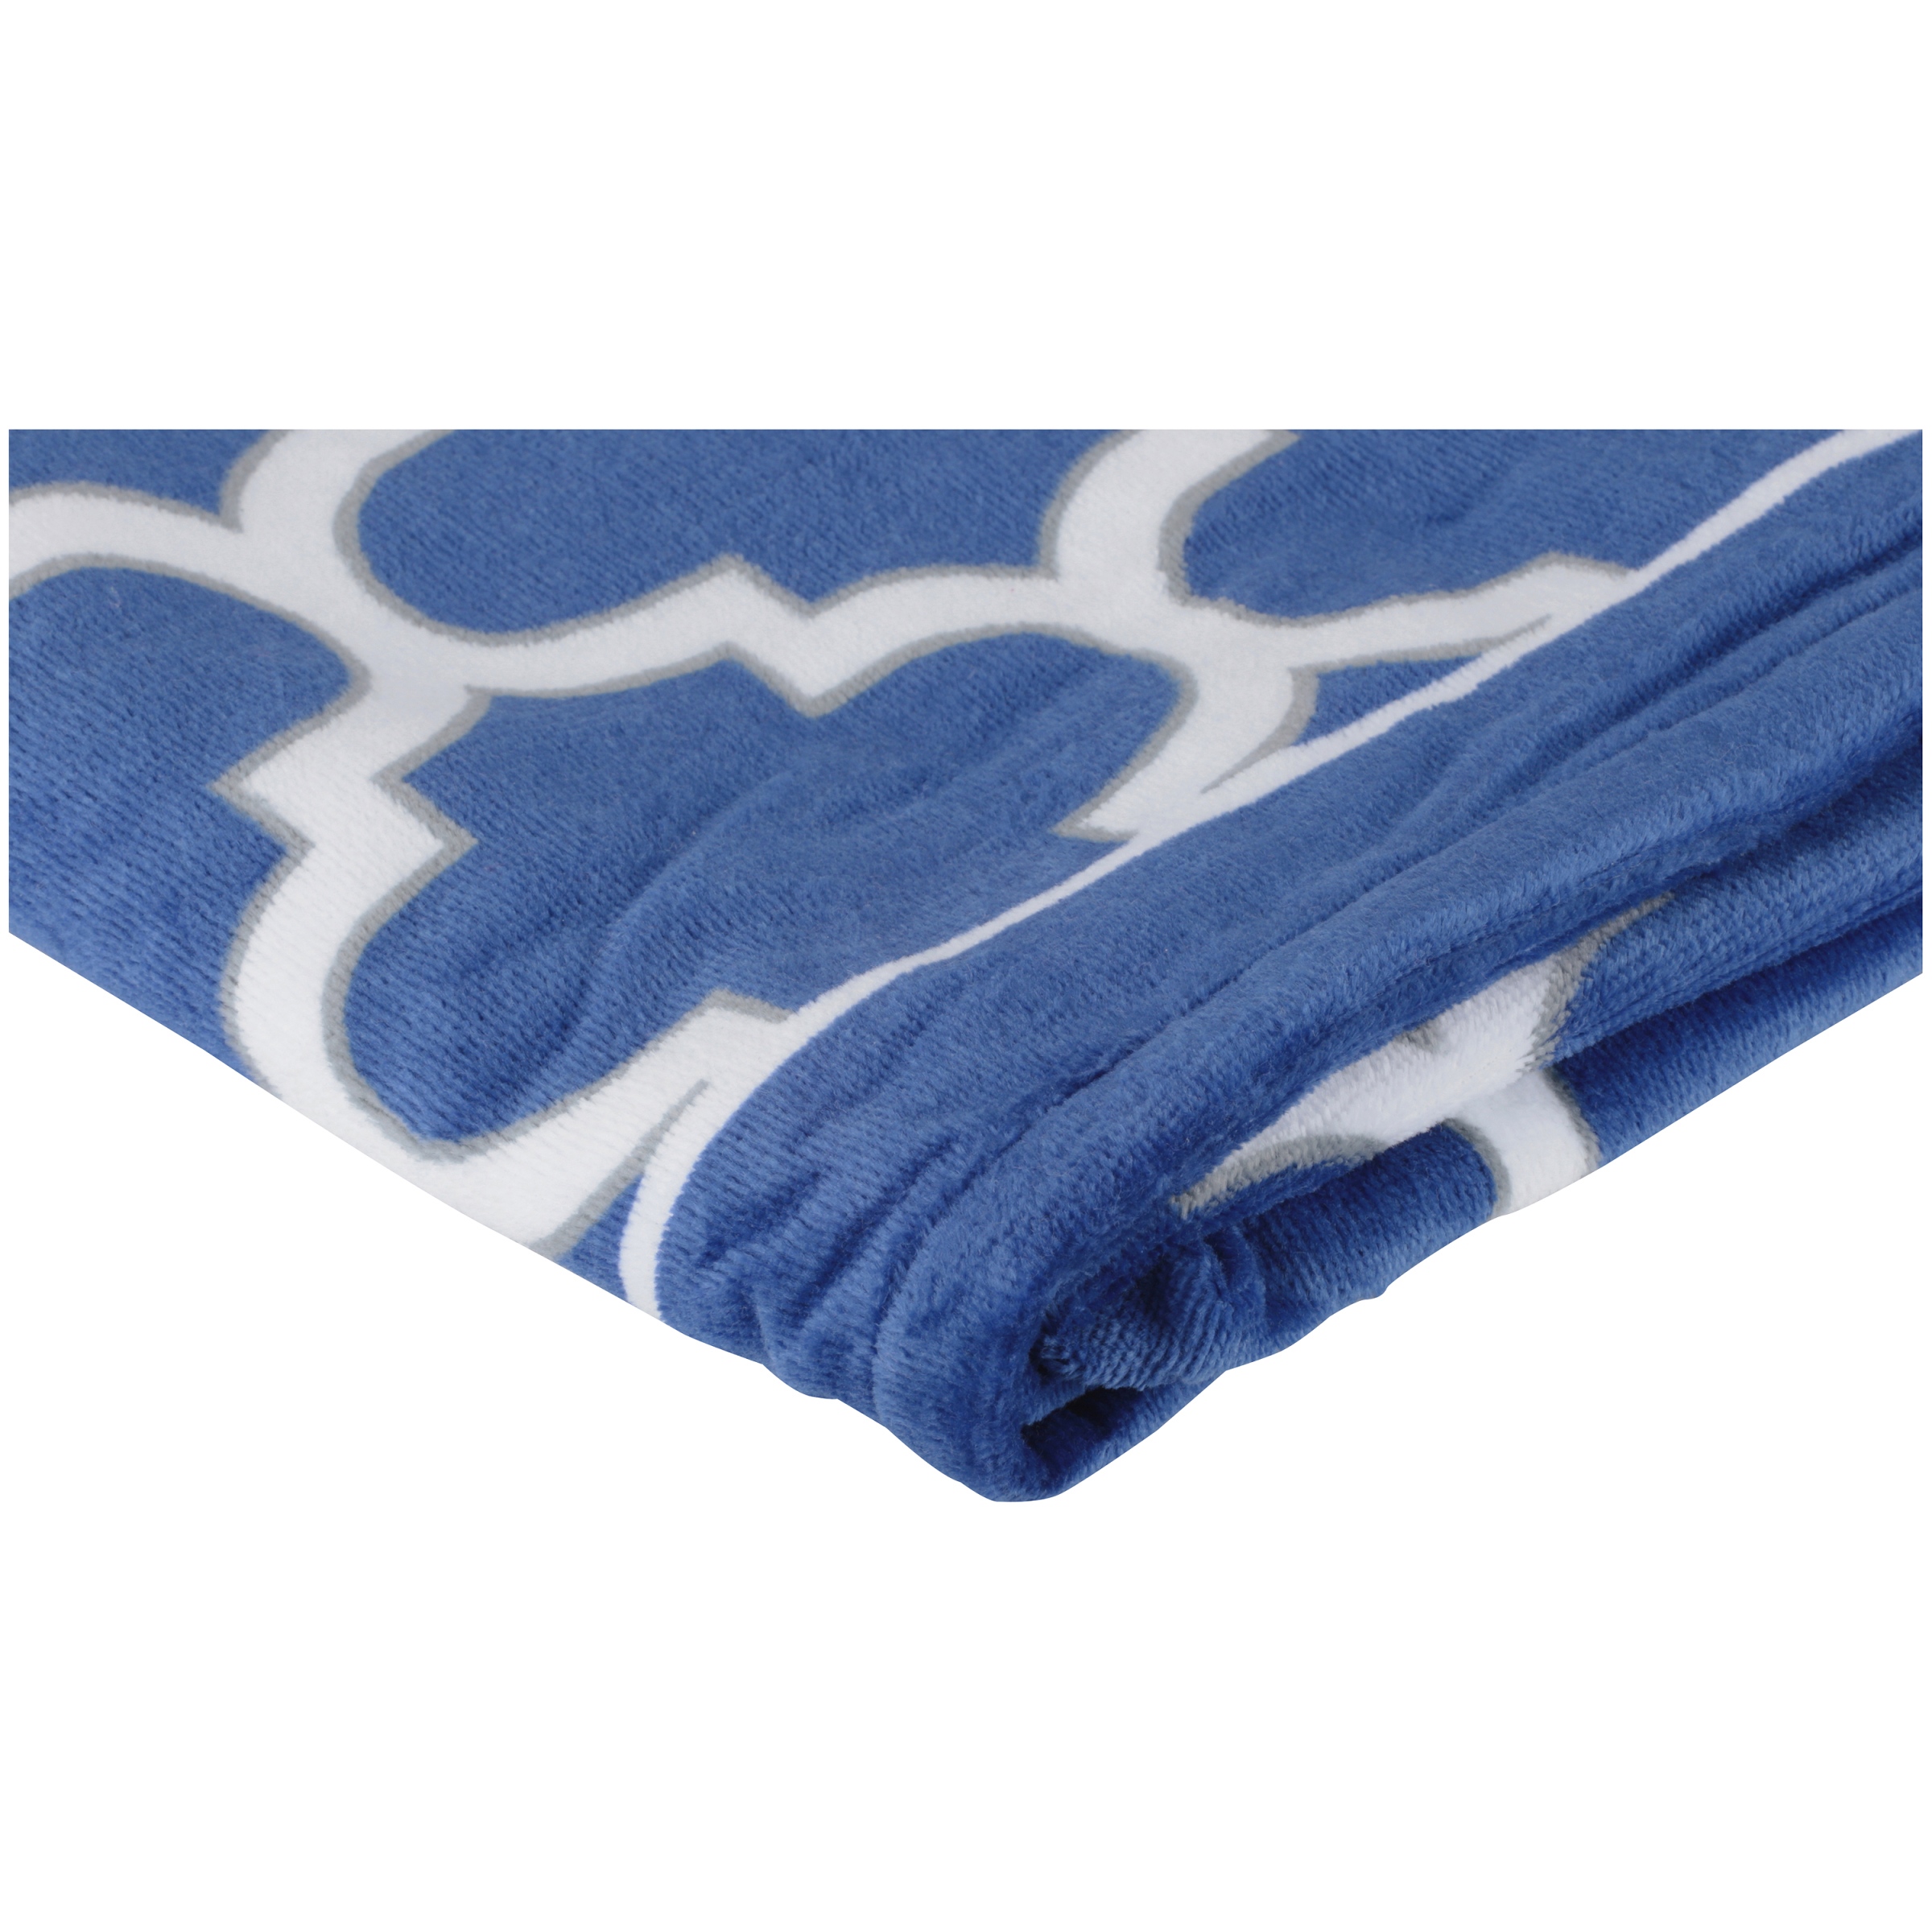 Mainstays Fretwork Navy & White Towel, 1 Each - image 2 of 2